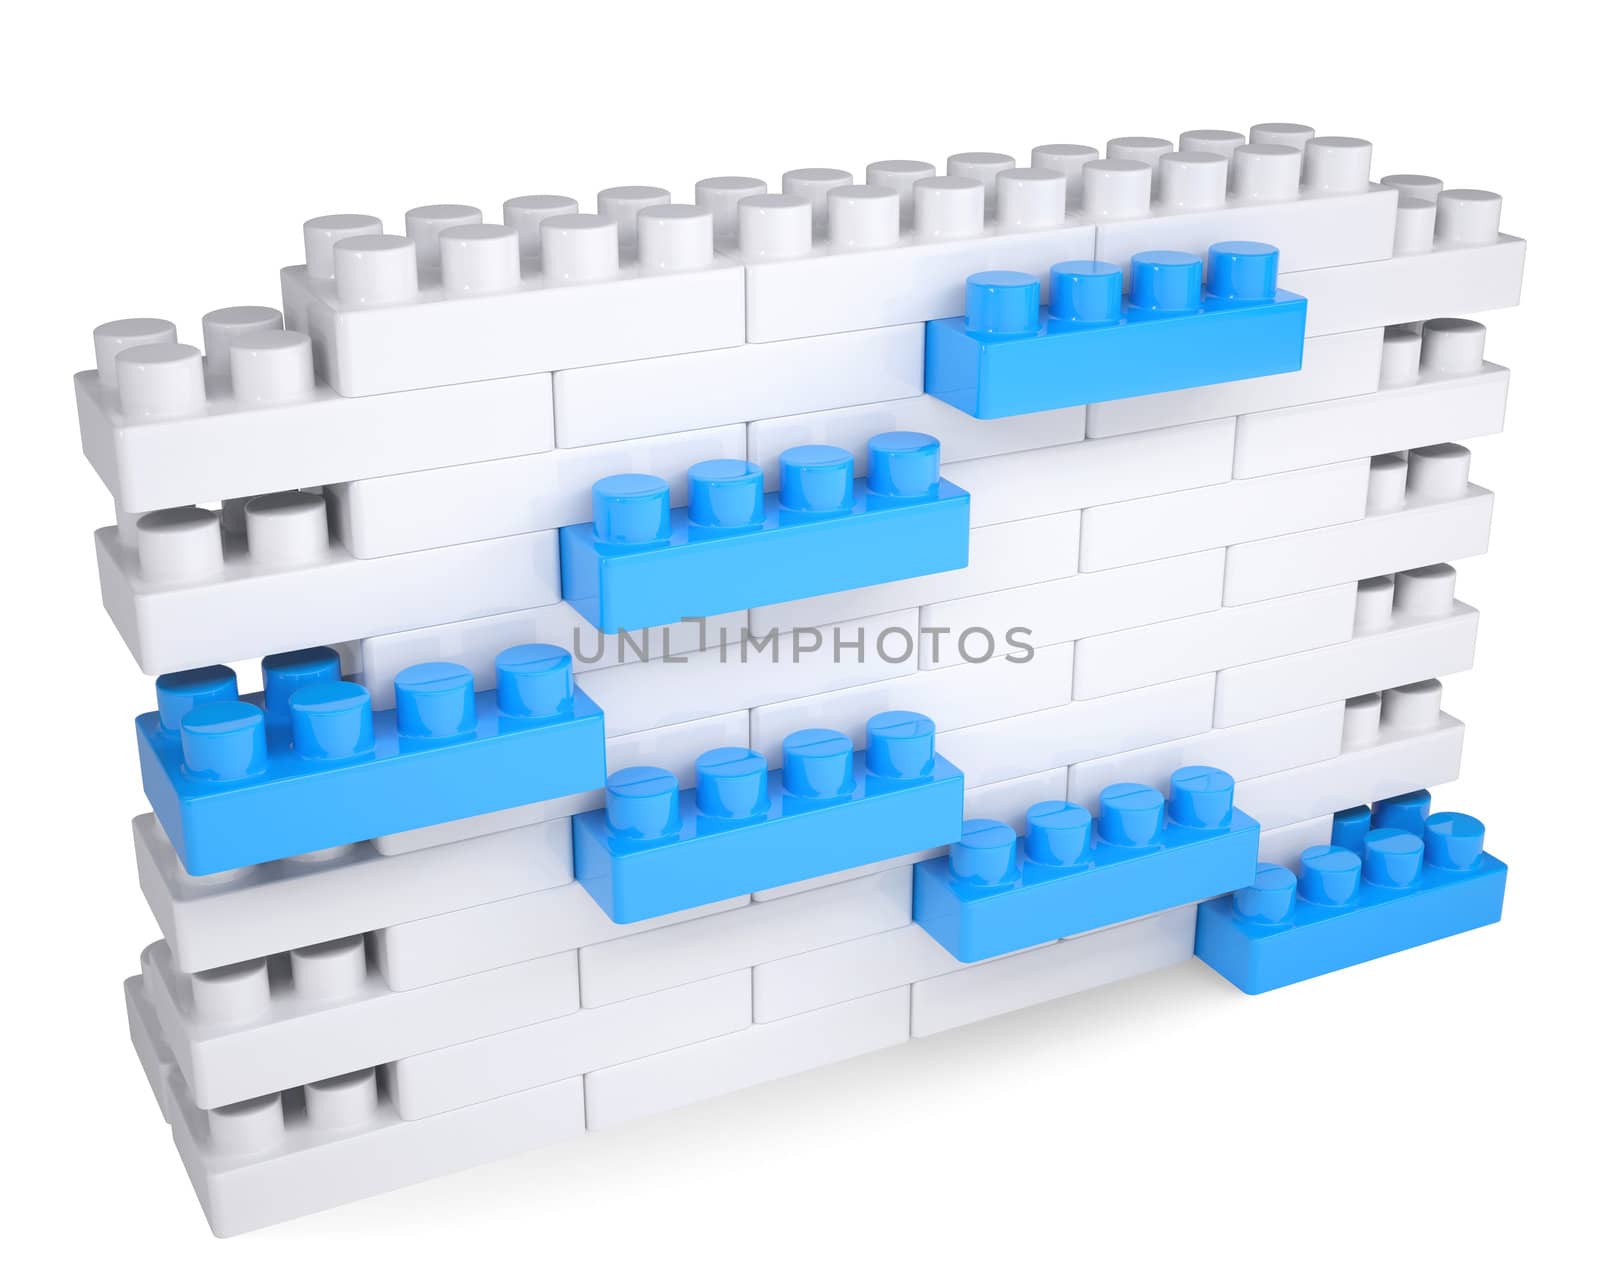 The wall of the children's blocks. Isolated render on a white background